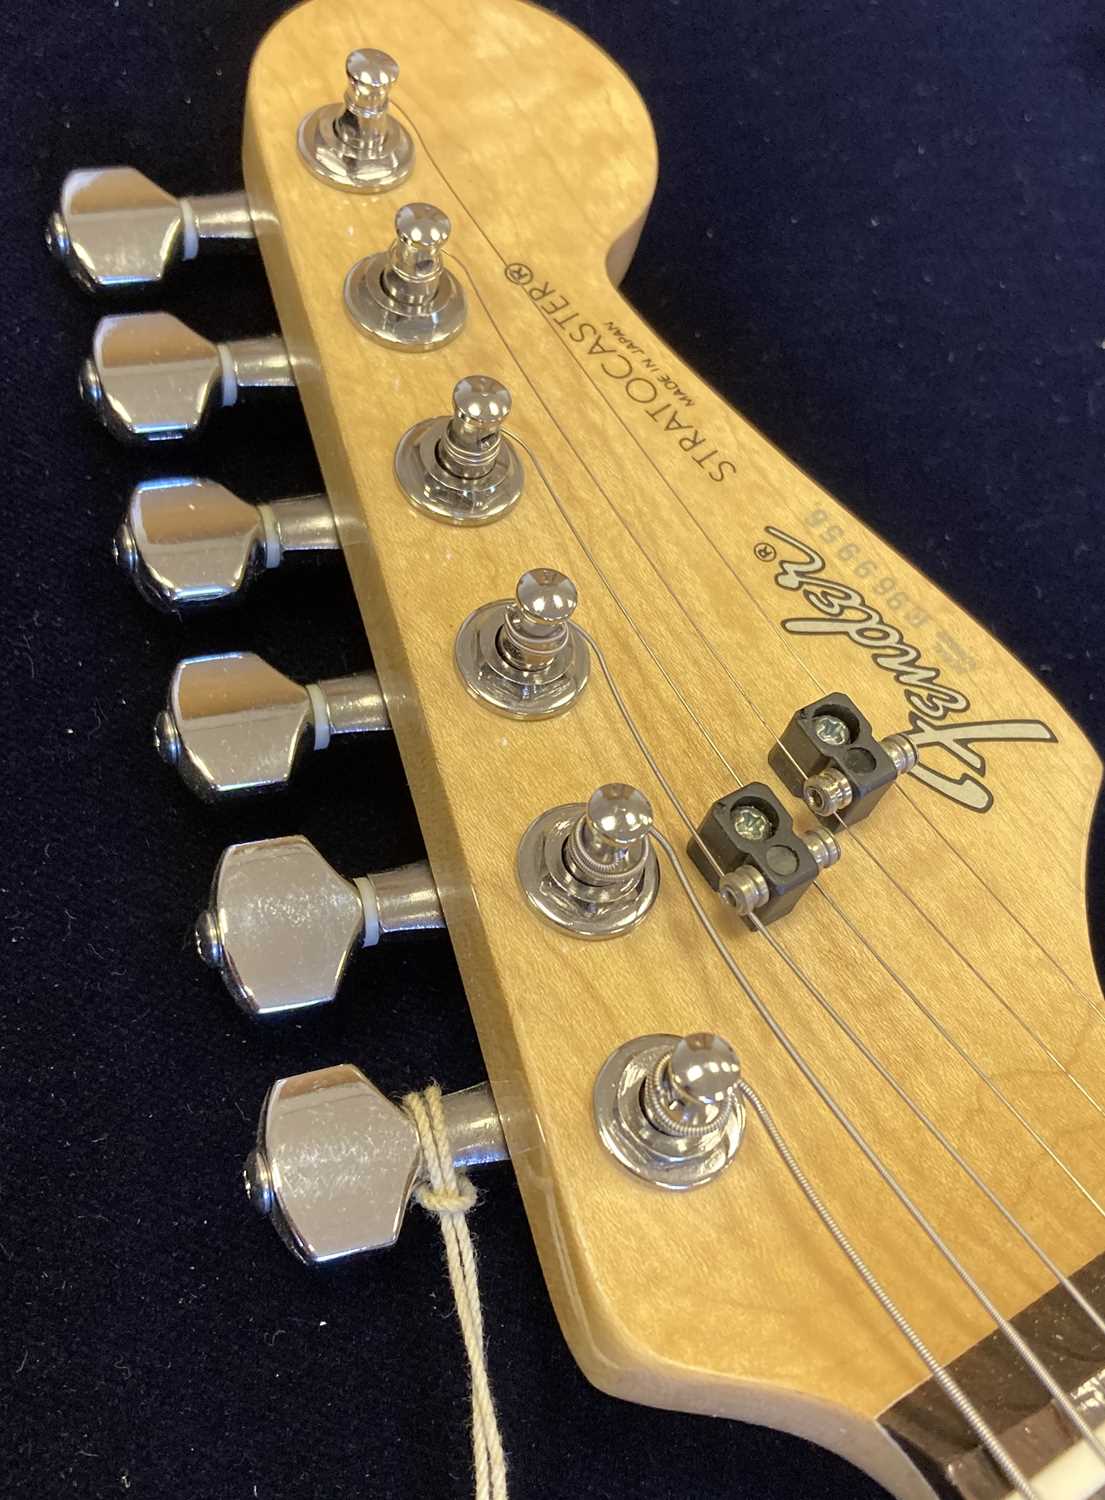 ROLLING STONES LIMITED EDITION FENDER STRATOCASTER - Image 7 of 8